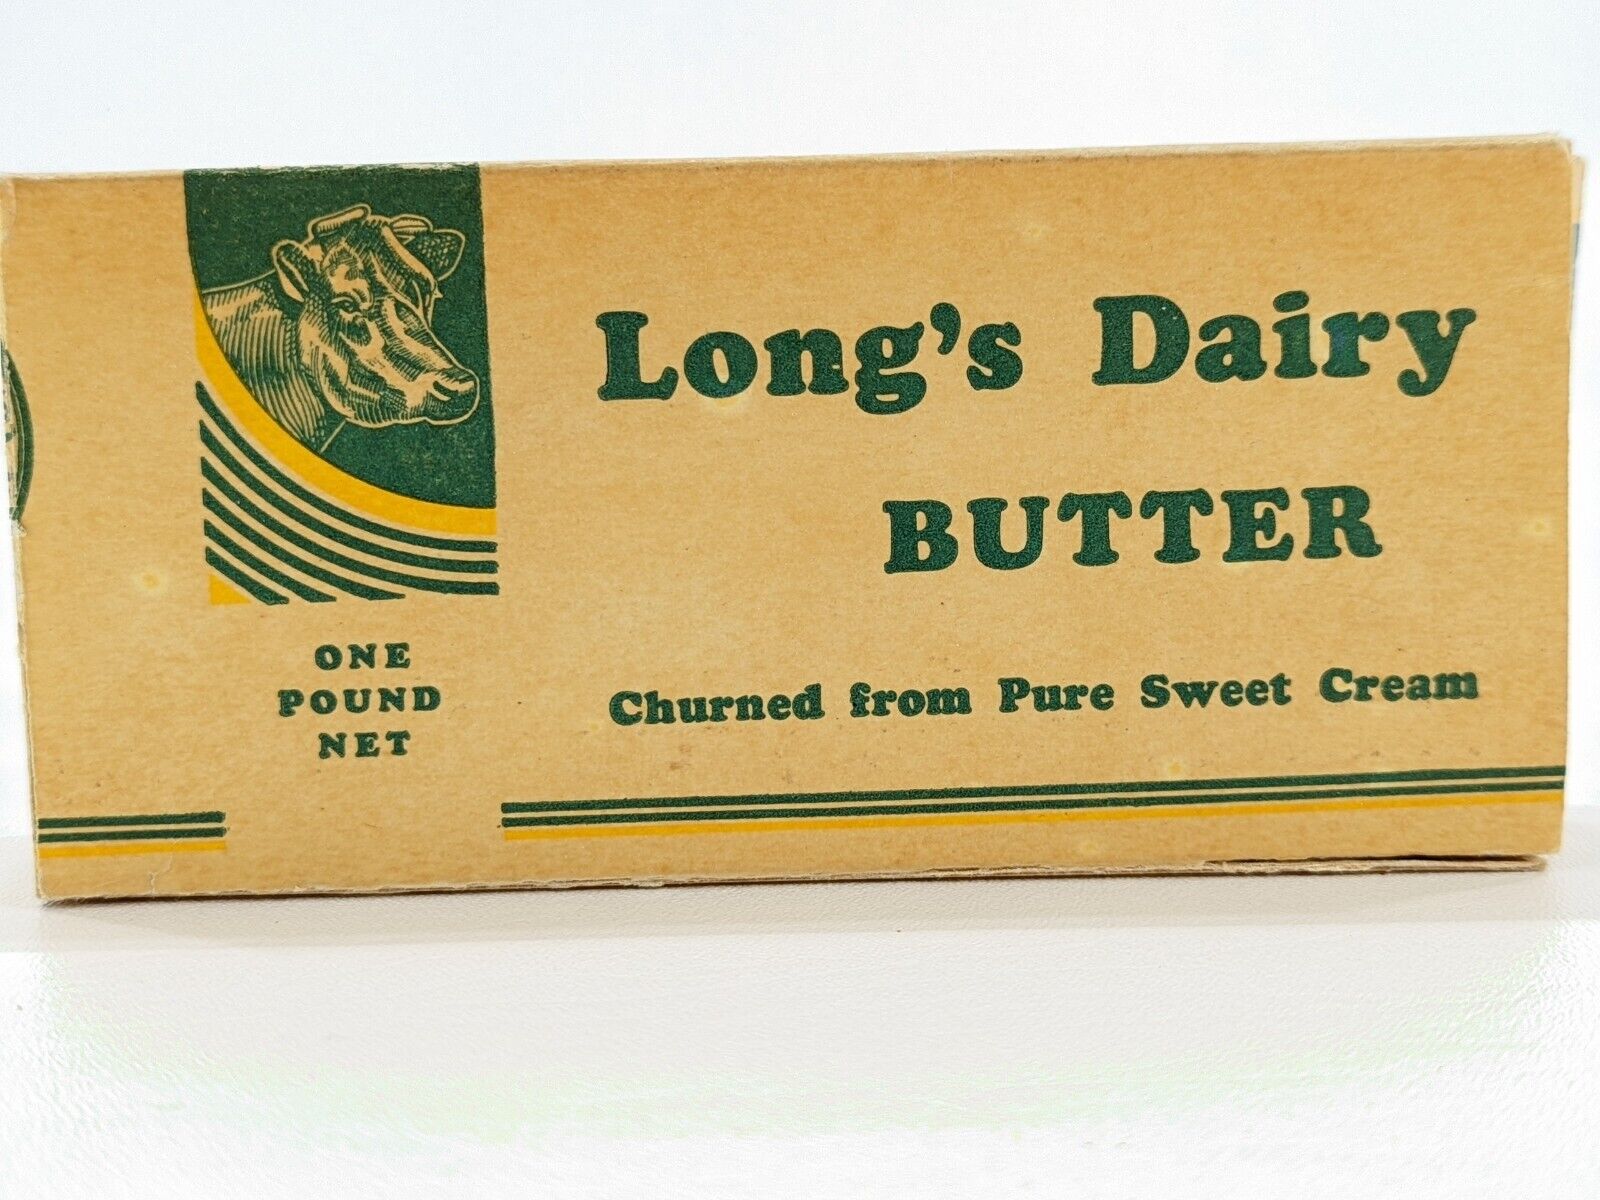 1938 Long's Dairy Butter Box Churned from Pure Sweet Cream